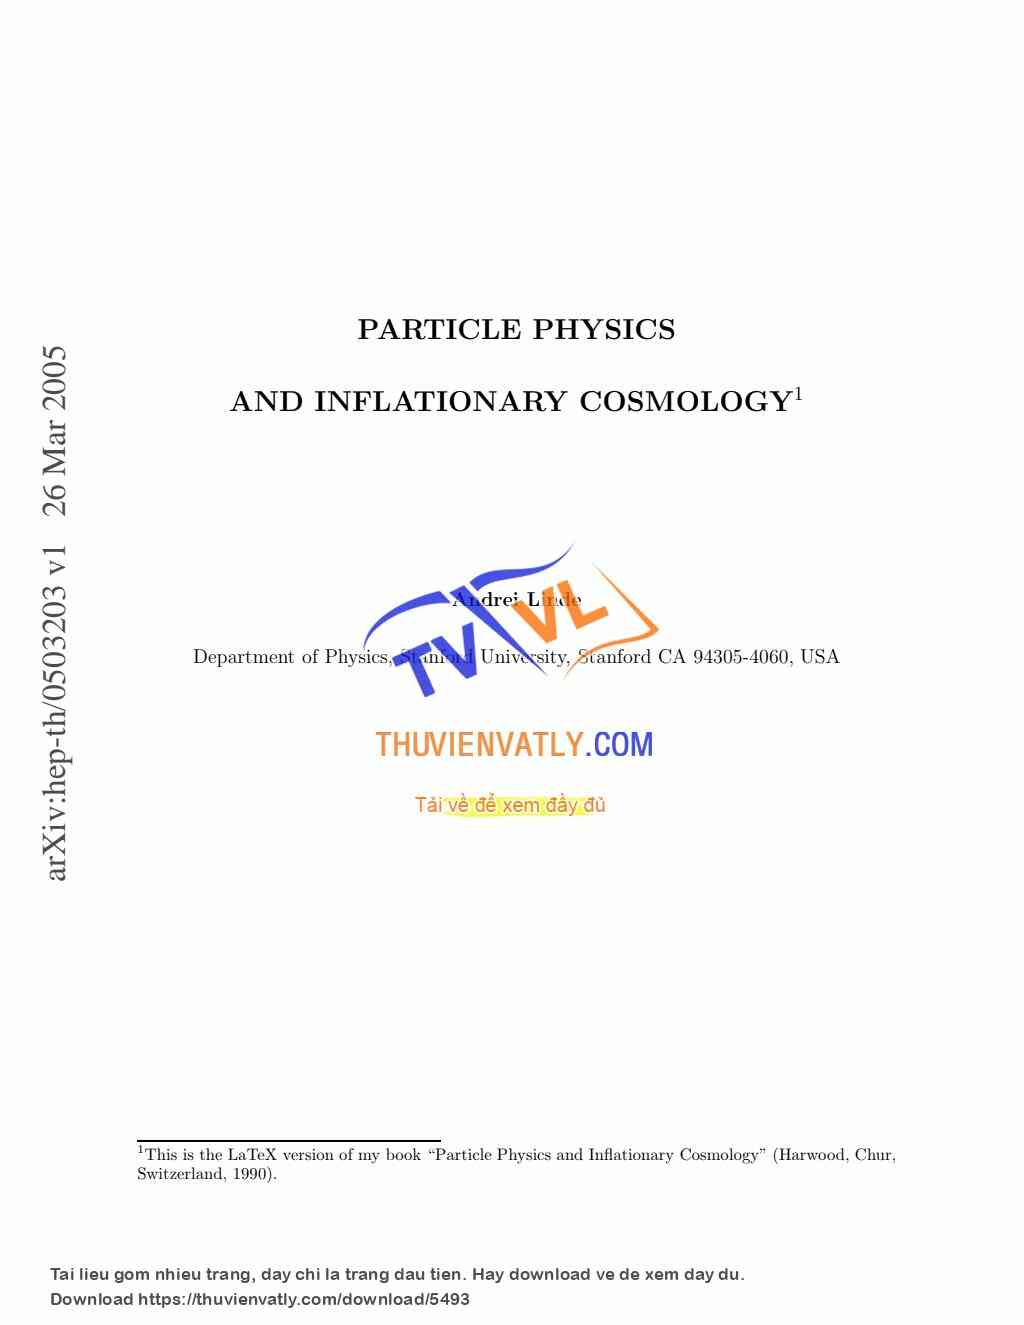 Particle Physics and Inflationary Cosmology - Linde